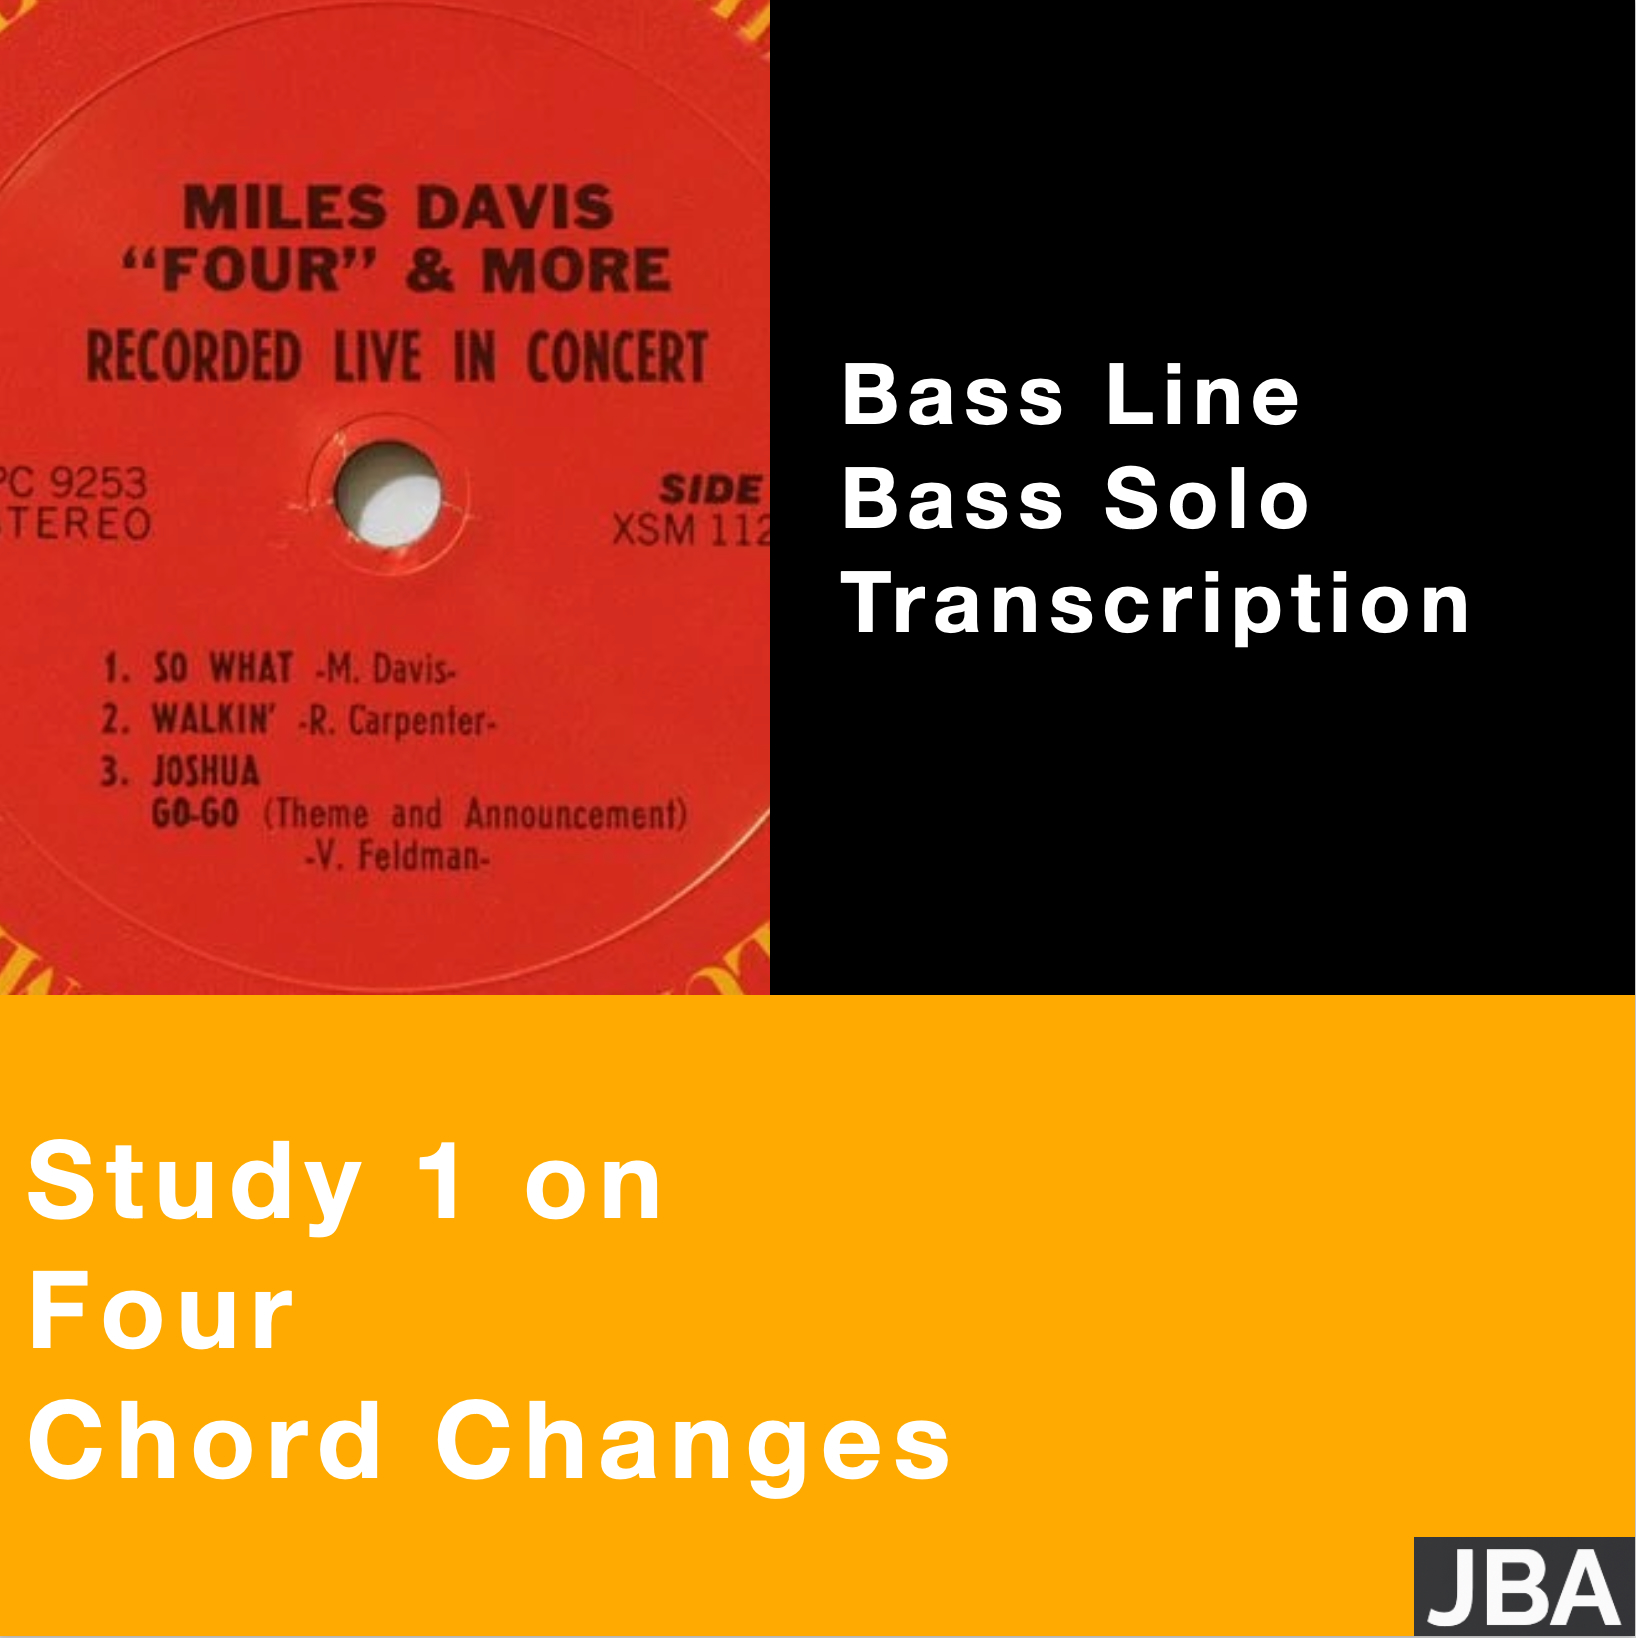 Study  1 on Four chord changes